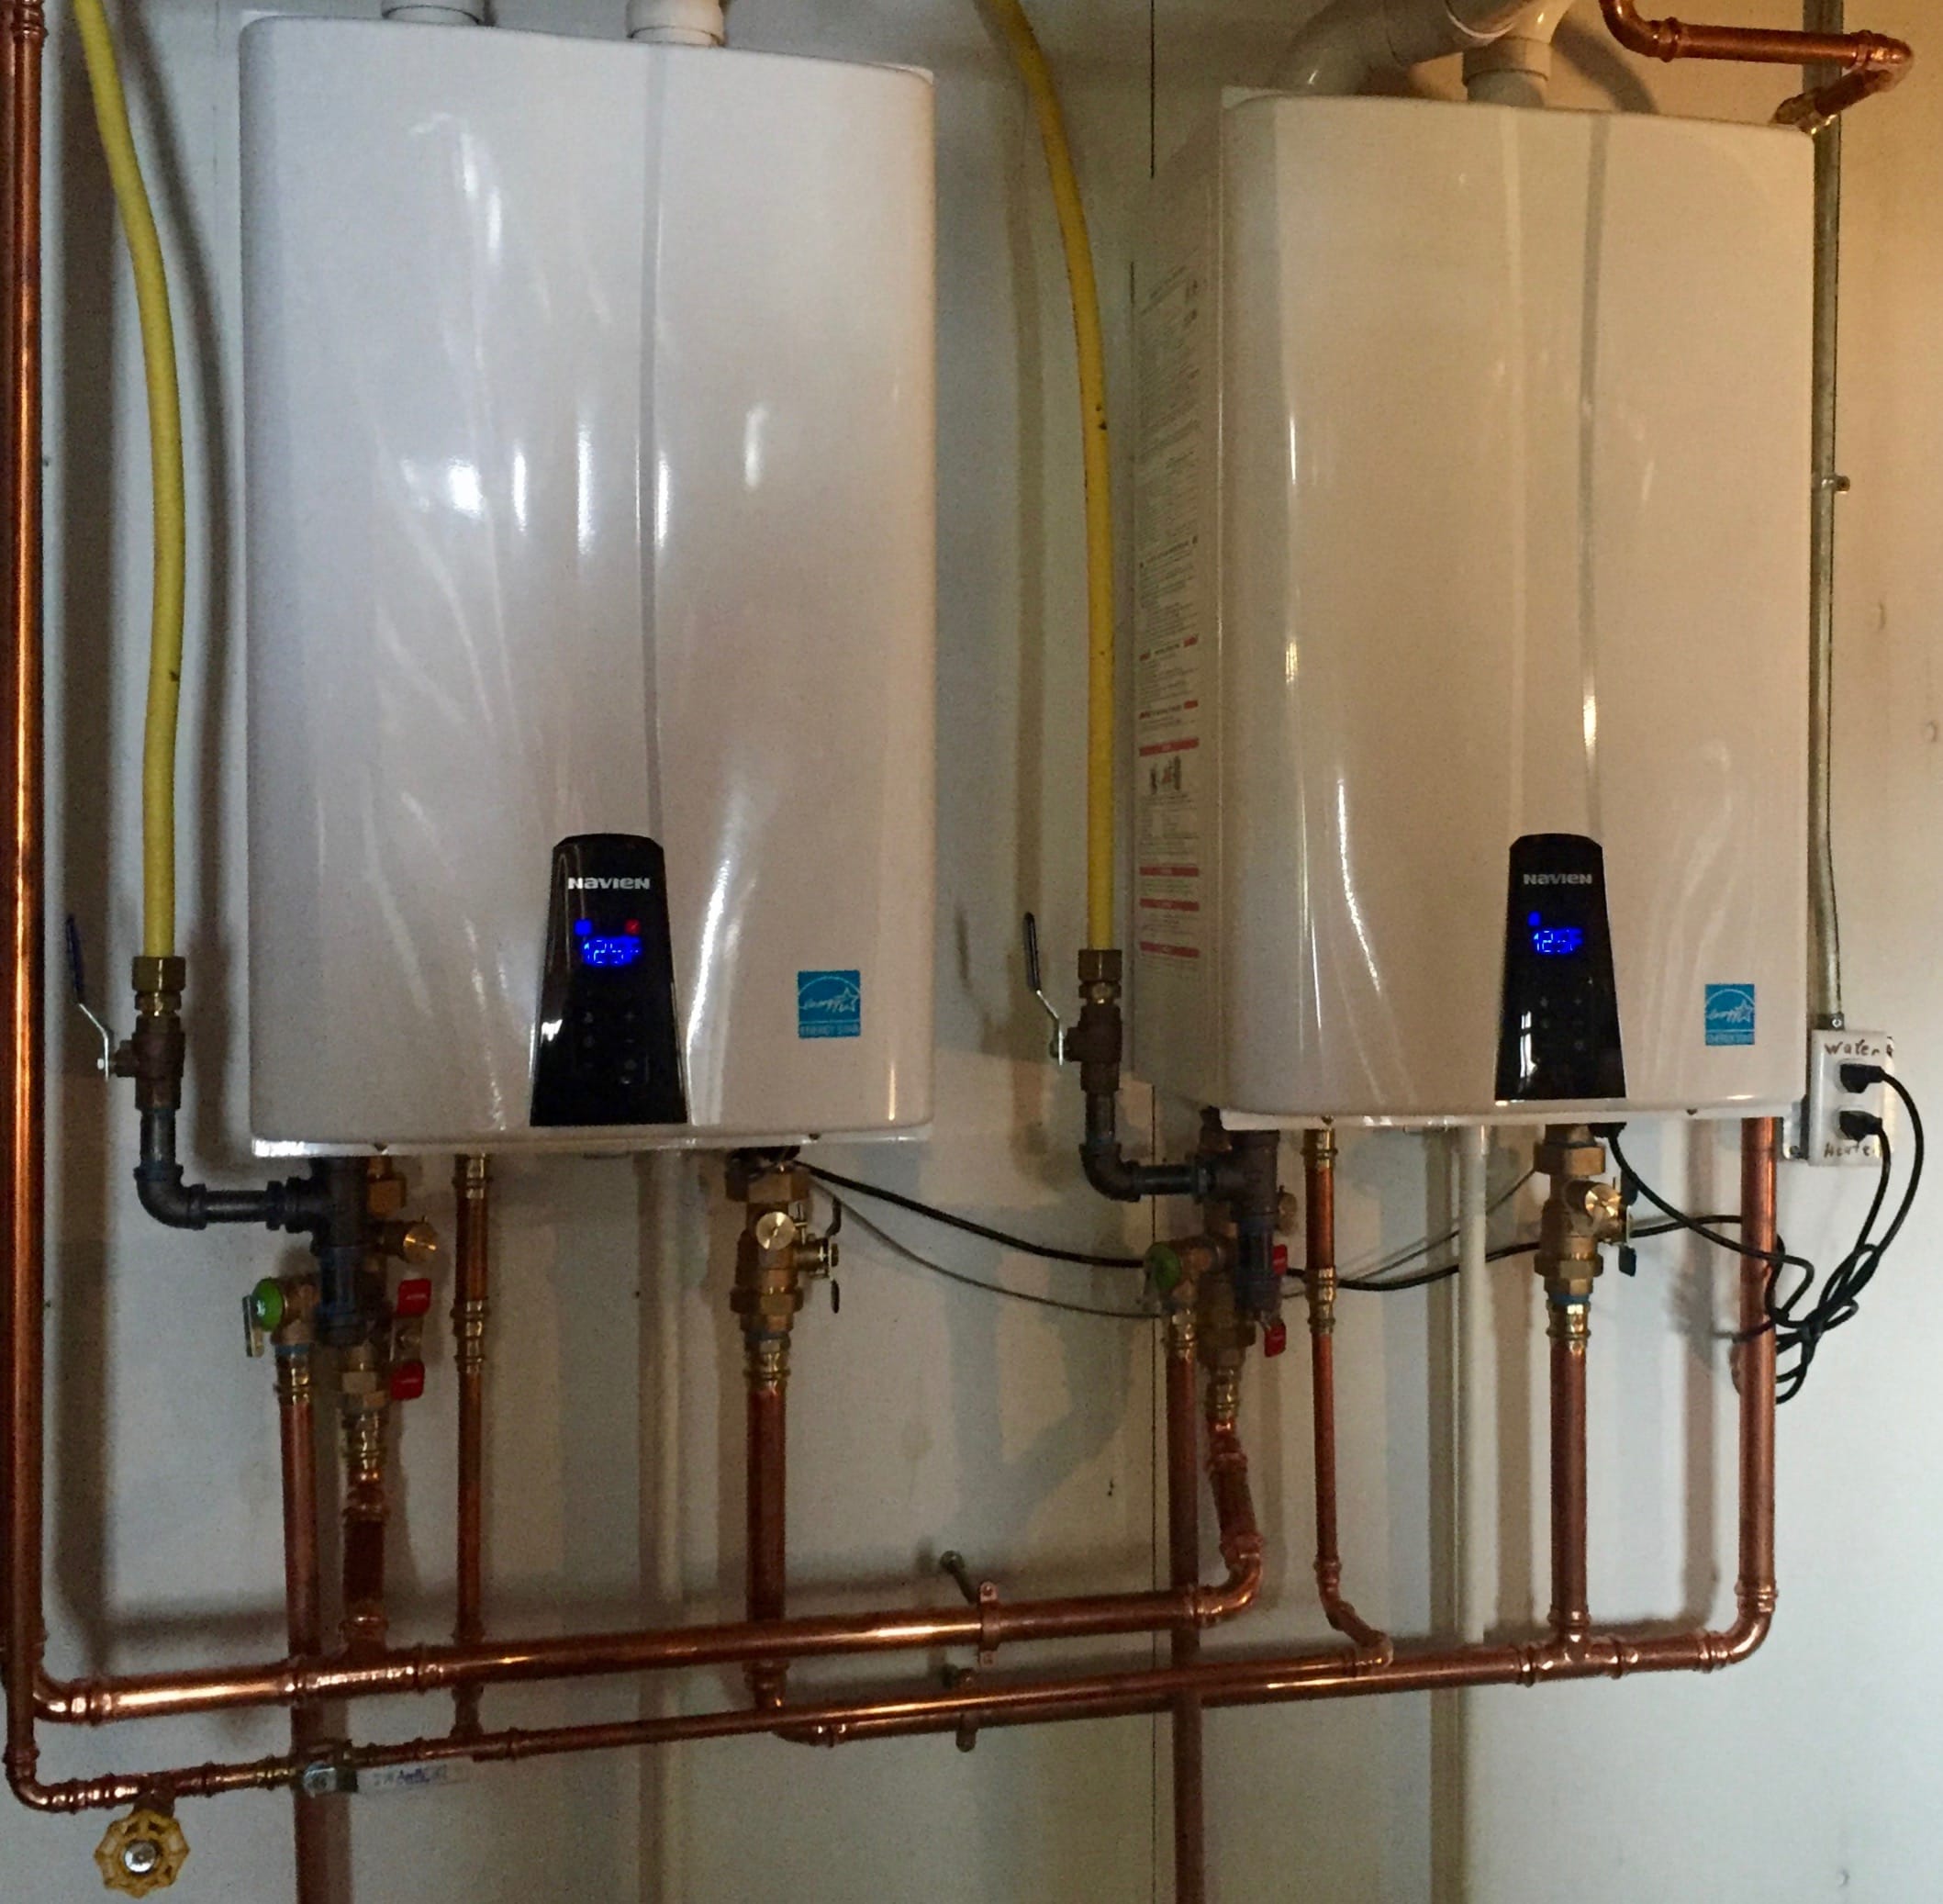 review-navien-npe-240a-tankless-water-heater-plumbing-perspective